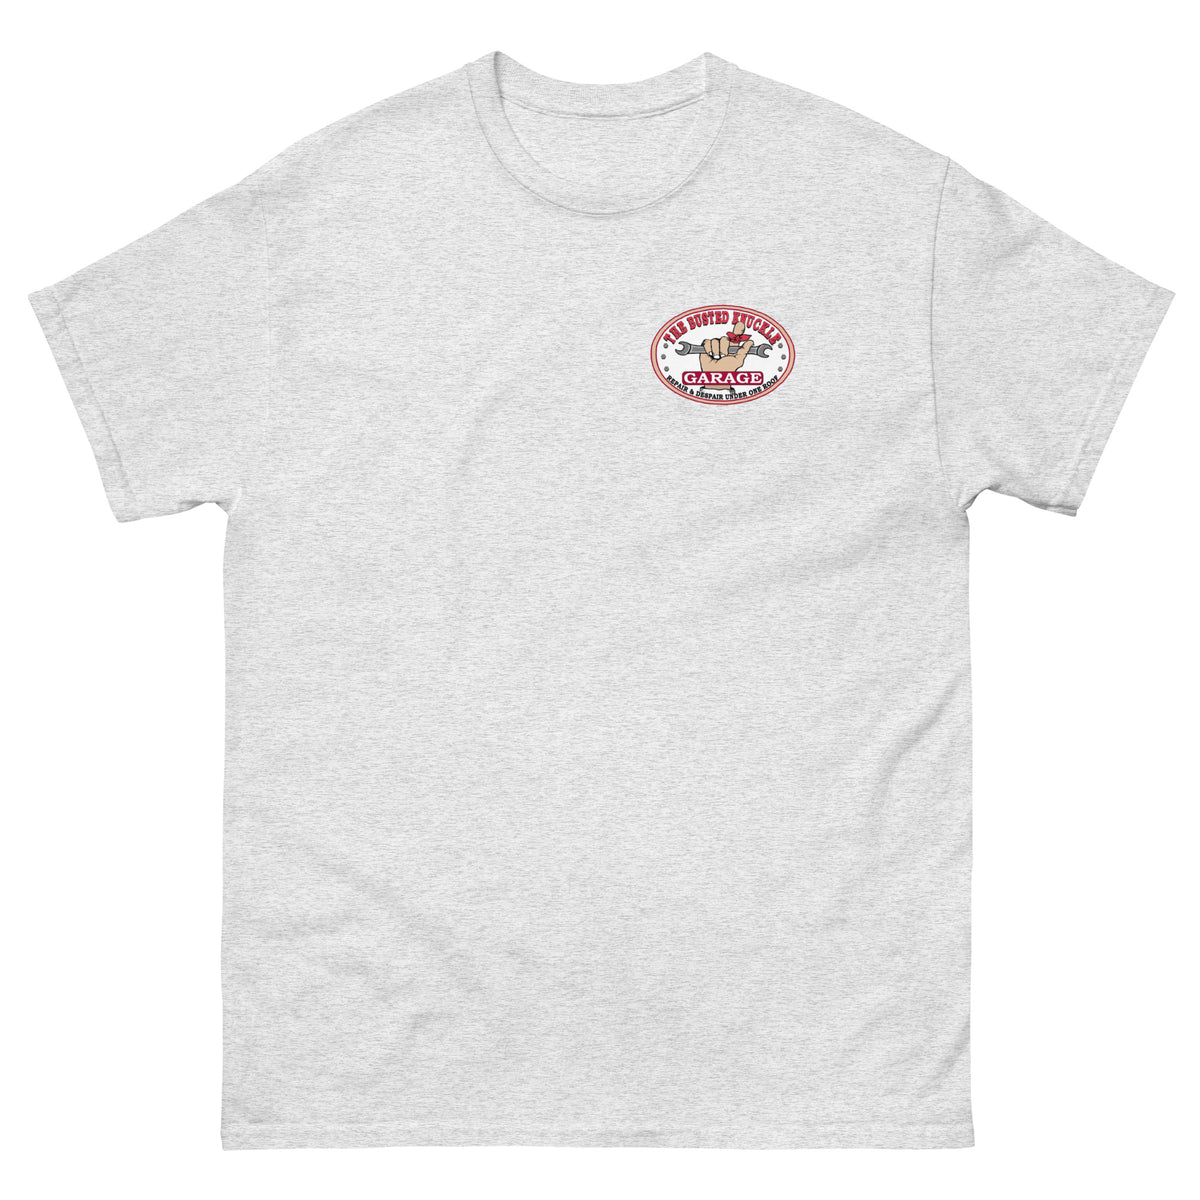 Busted Knuckle Garage Carguy Autocross Truck T-Shirt